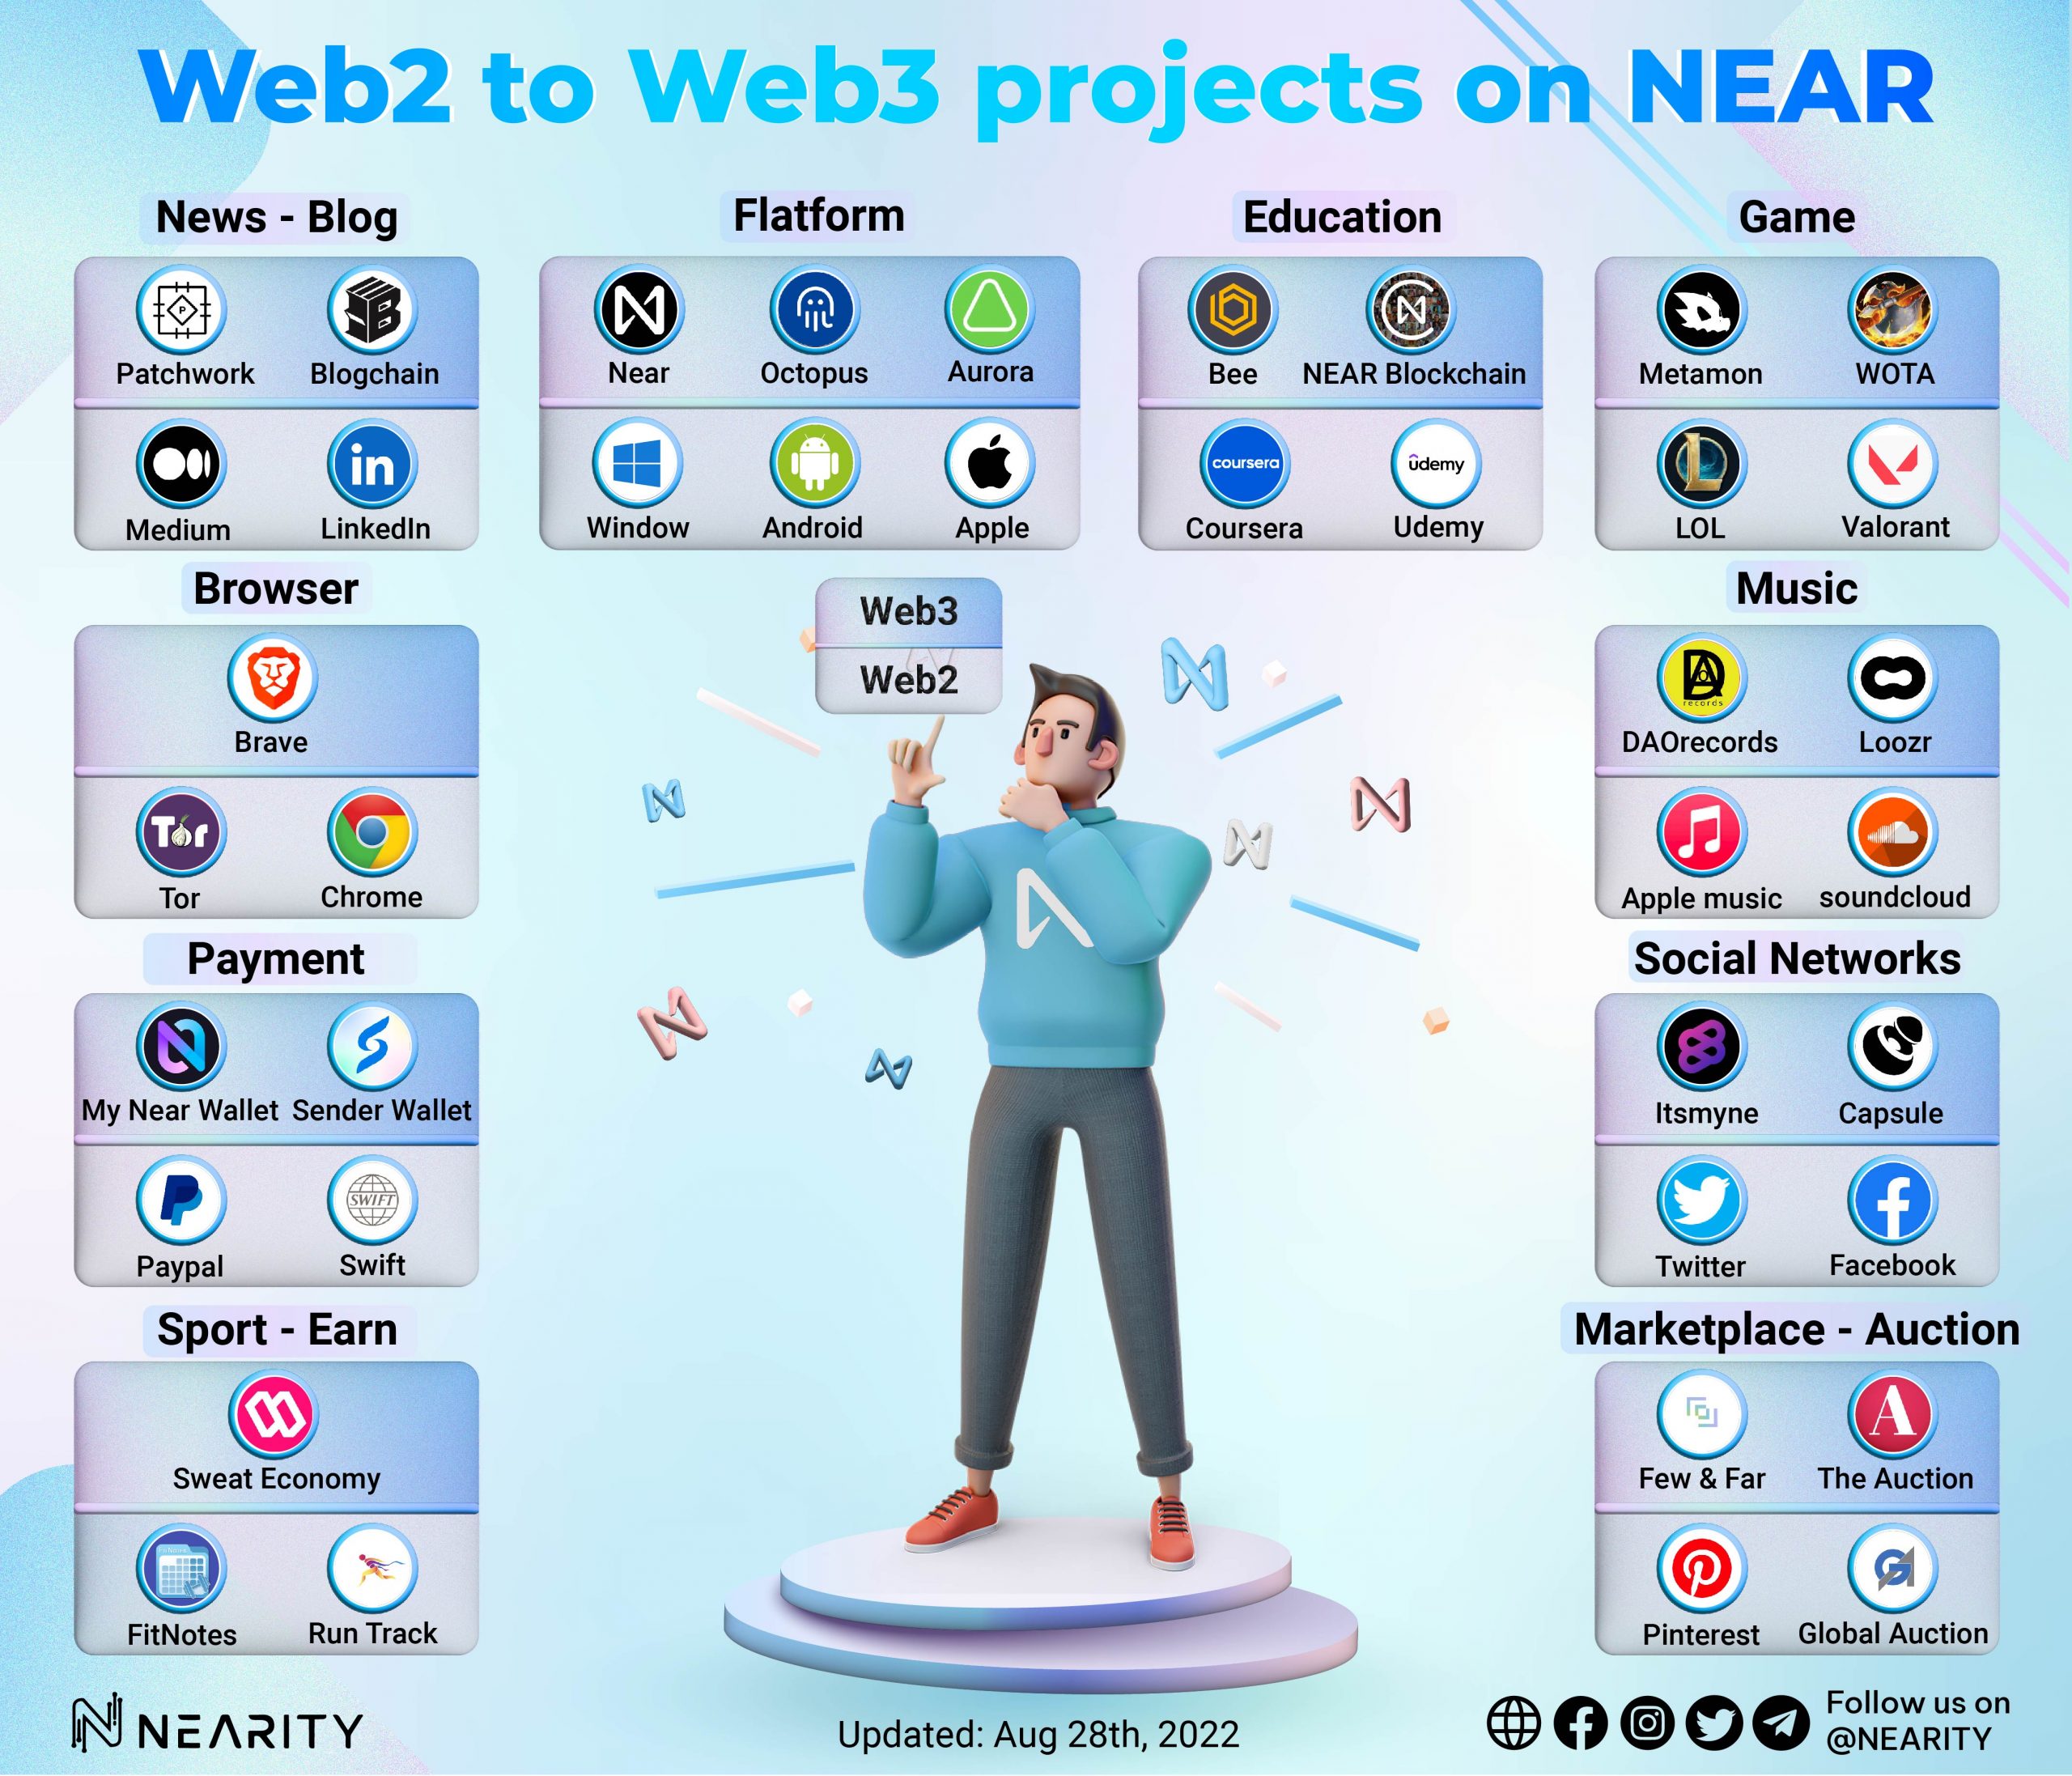 Web2 to web3 projects on Near